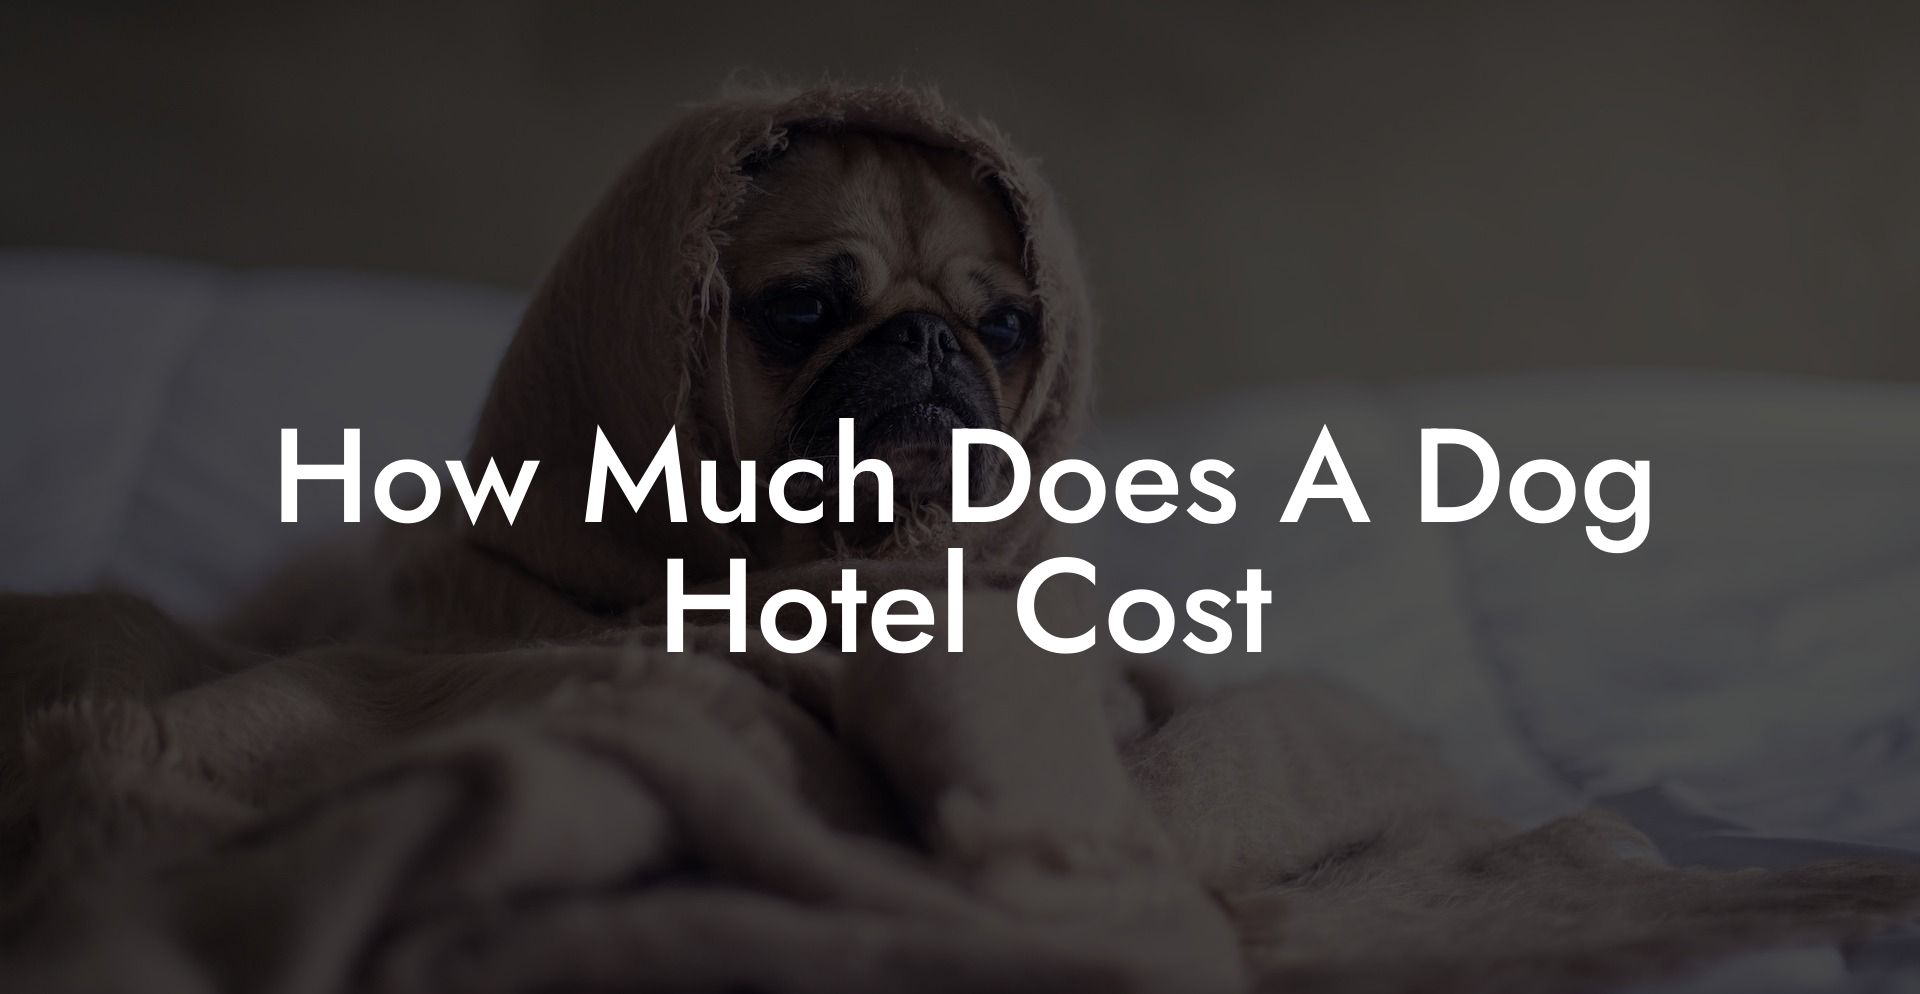 How Much Does A Dog Hotel Cost